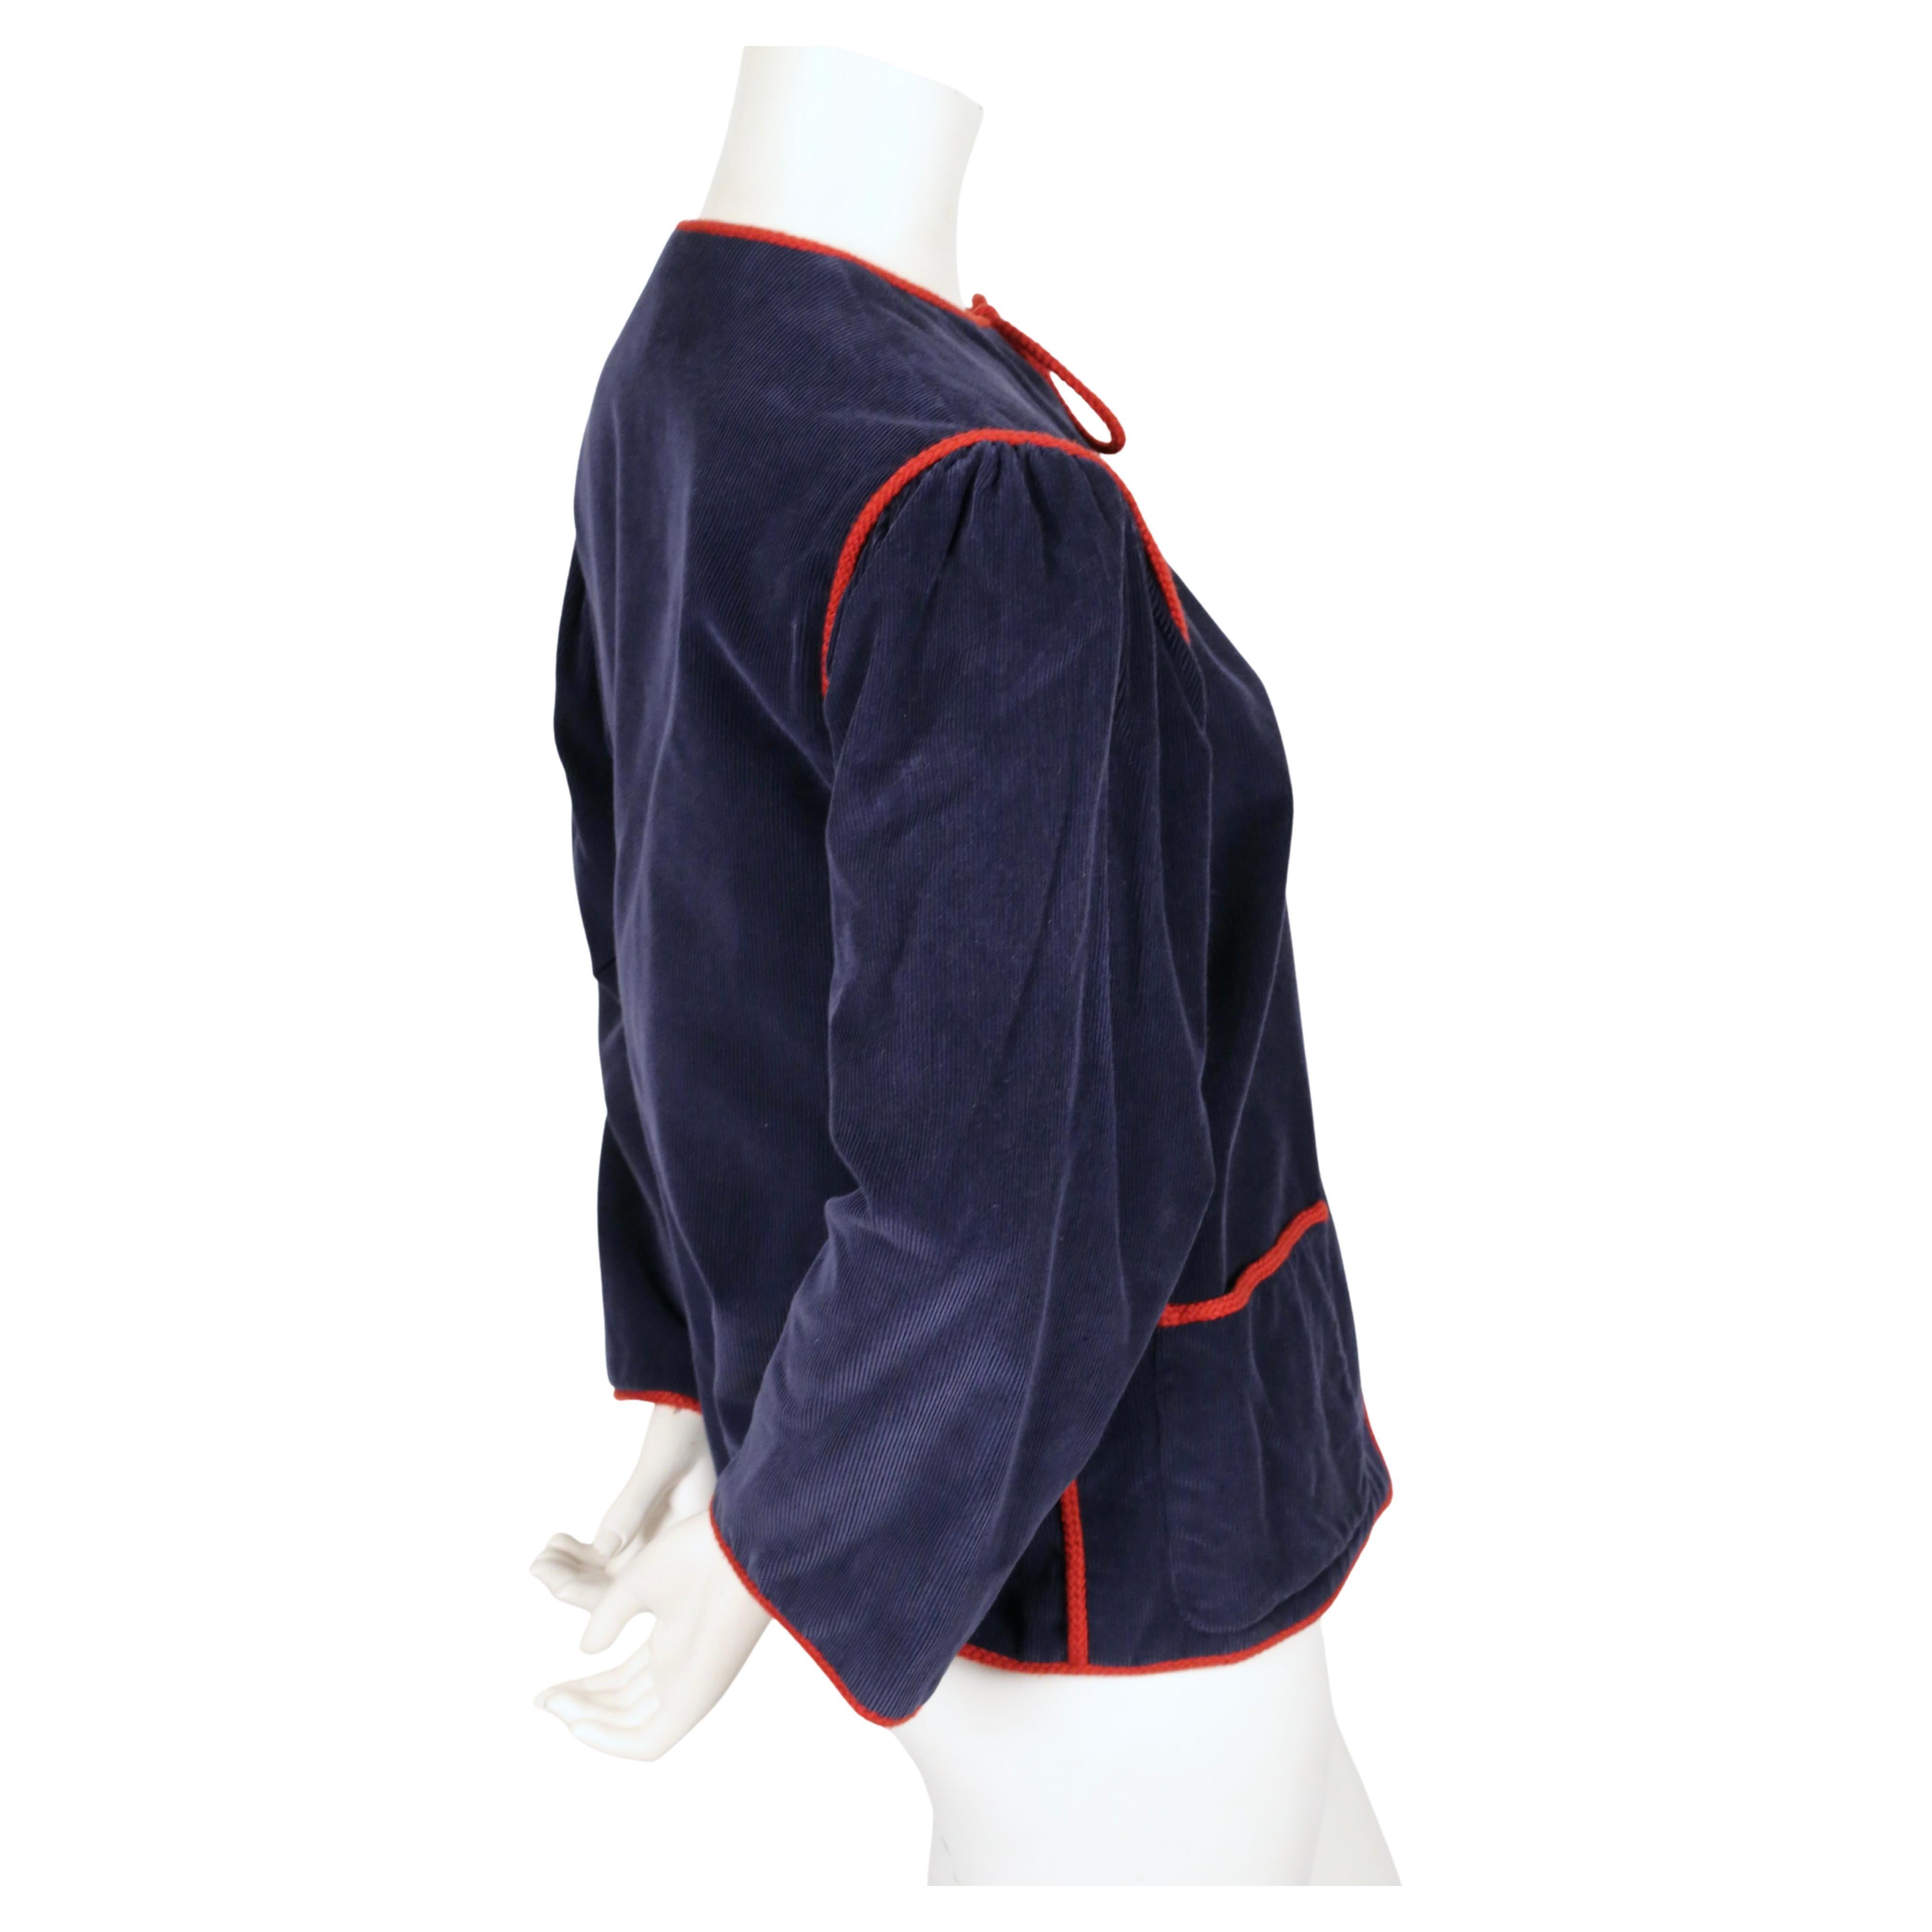 1977 YVES SAINT LAURENT blue corduroy peasant RUNWAY jacket with red trim In Good Condition For Sale In San Fransisco, CA